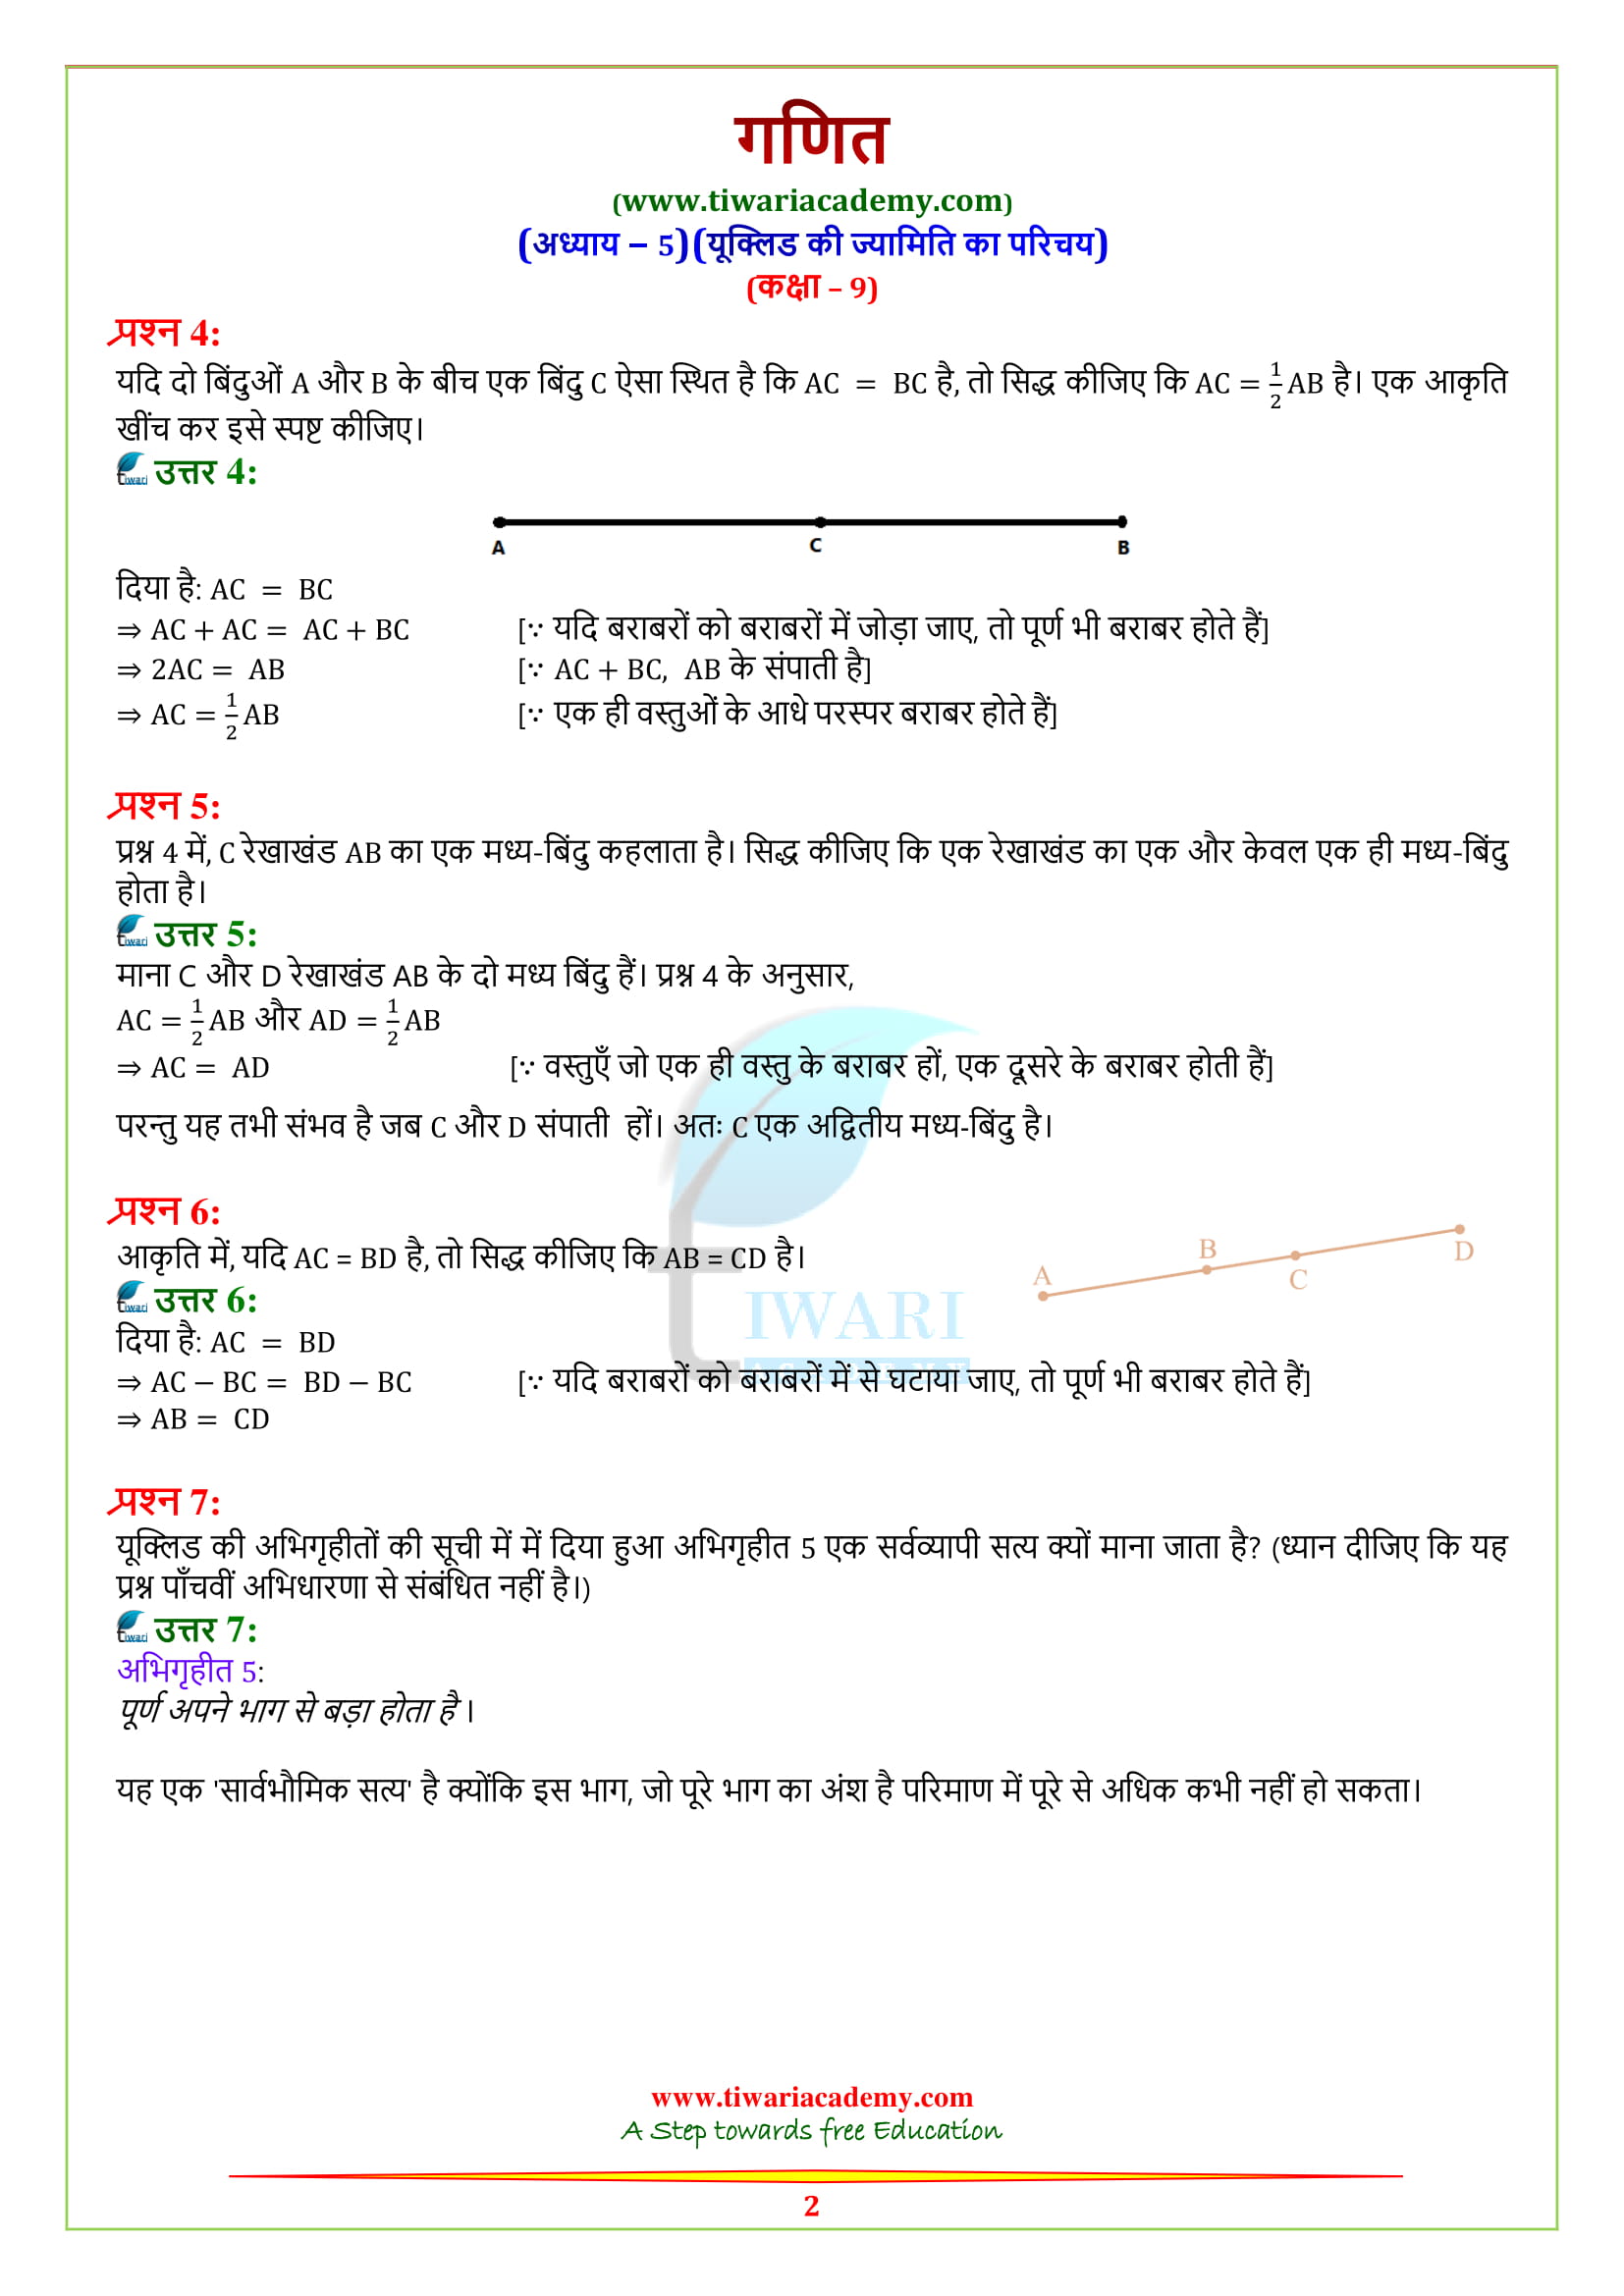 NCERT Solutions for Class 9 Maths Chapter 5 Exercise 5.1 in hindi updated for 2018-19.